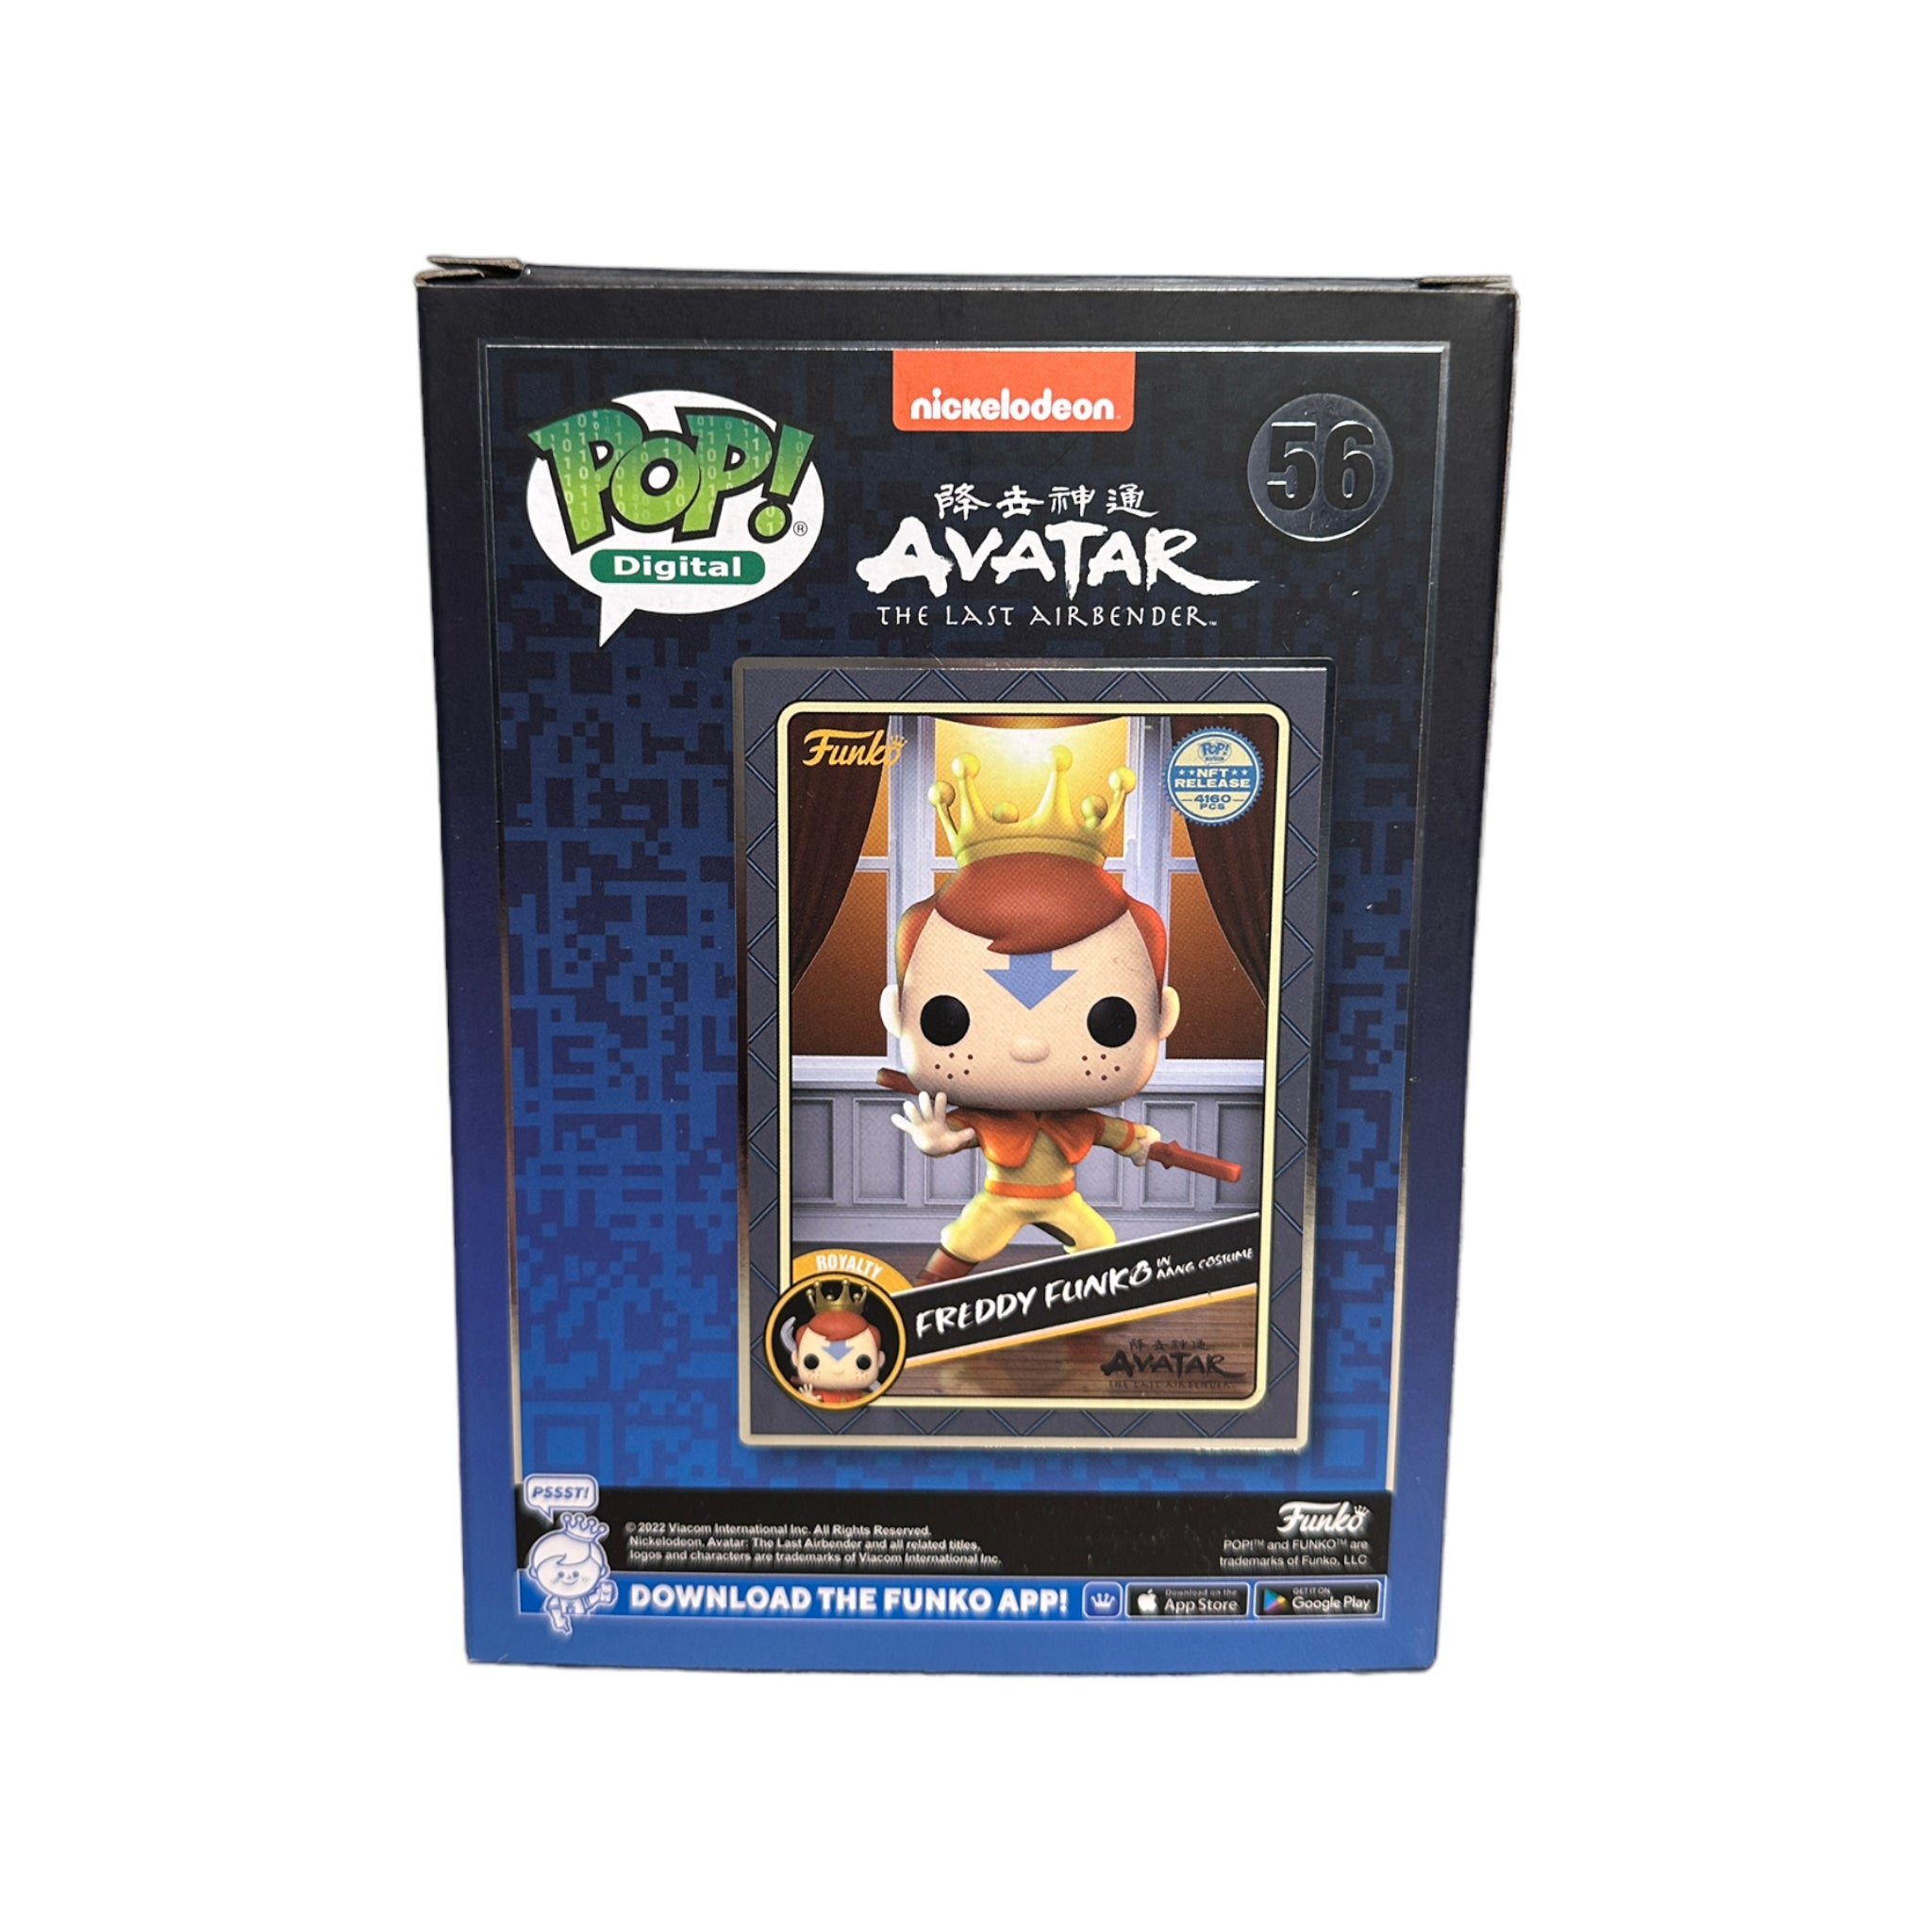 Freddy Funko as Aang #56 Funko Pop! - Avatar: The Last Airbender - NFT Release Exclusive LE4160 Pcs - Condition 9.5/10